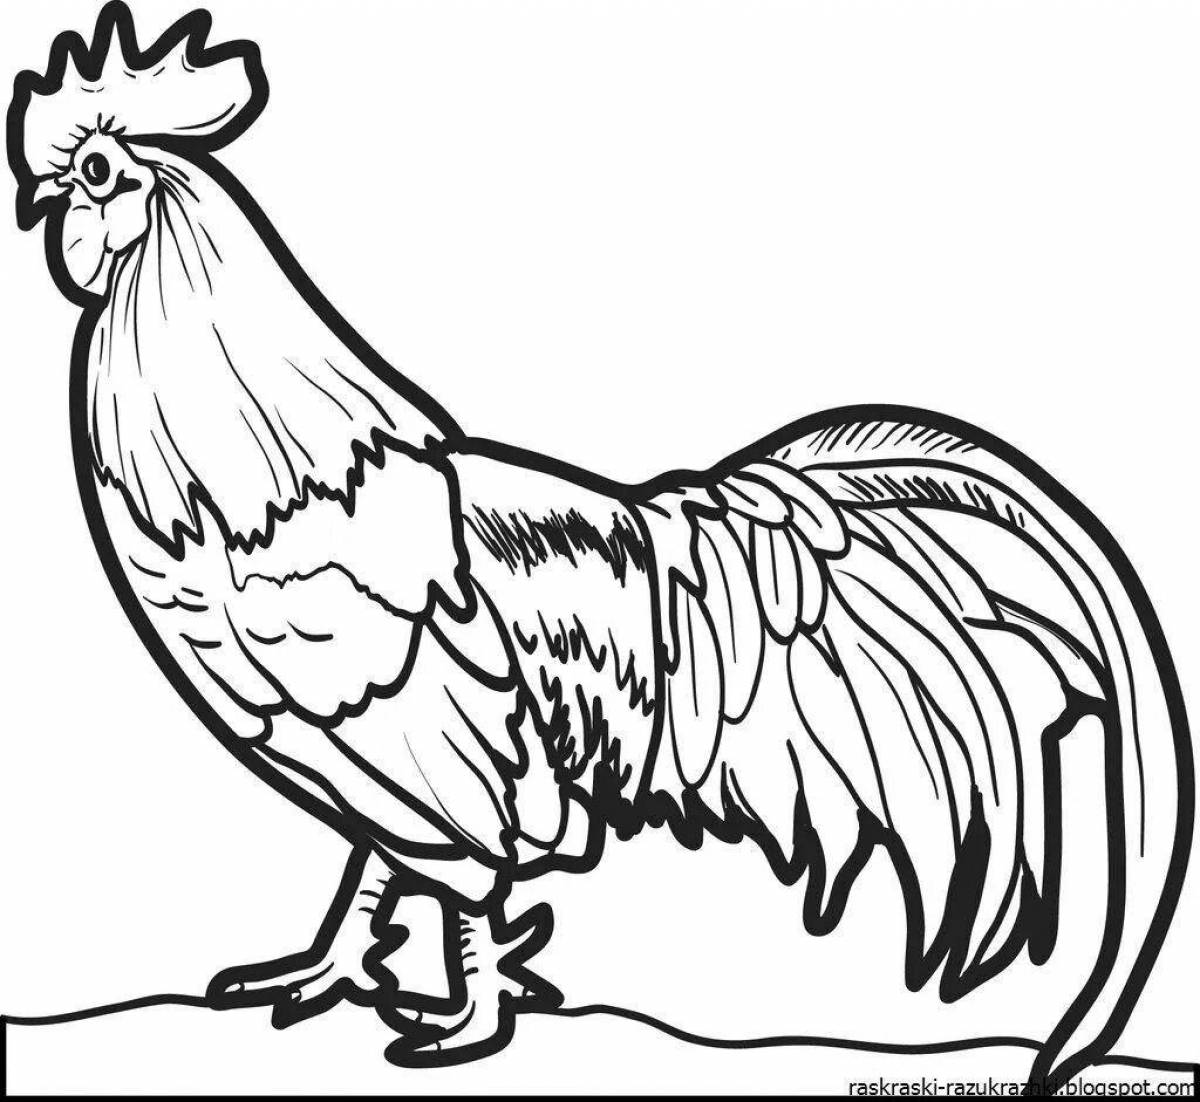 Cute chicks coloring page